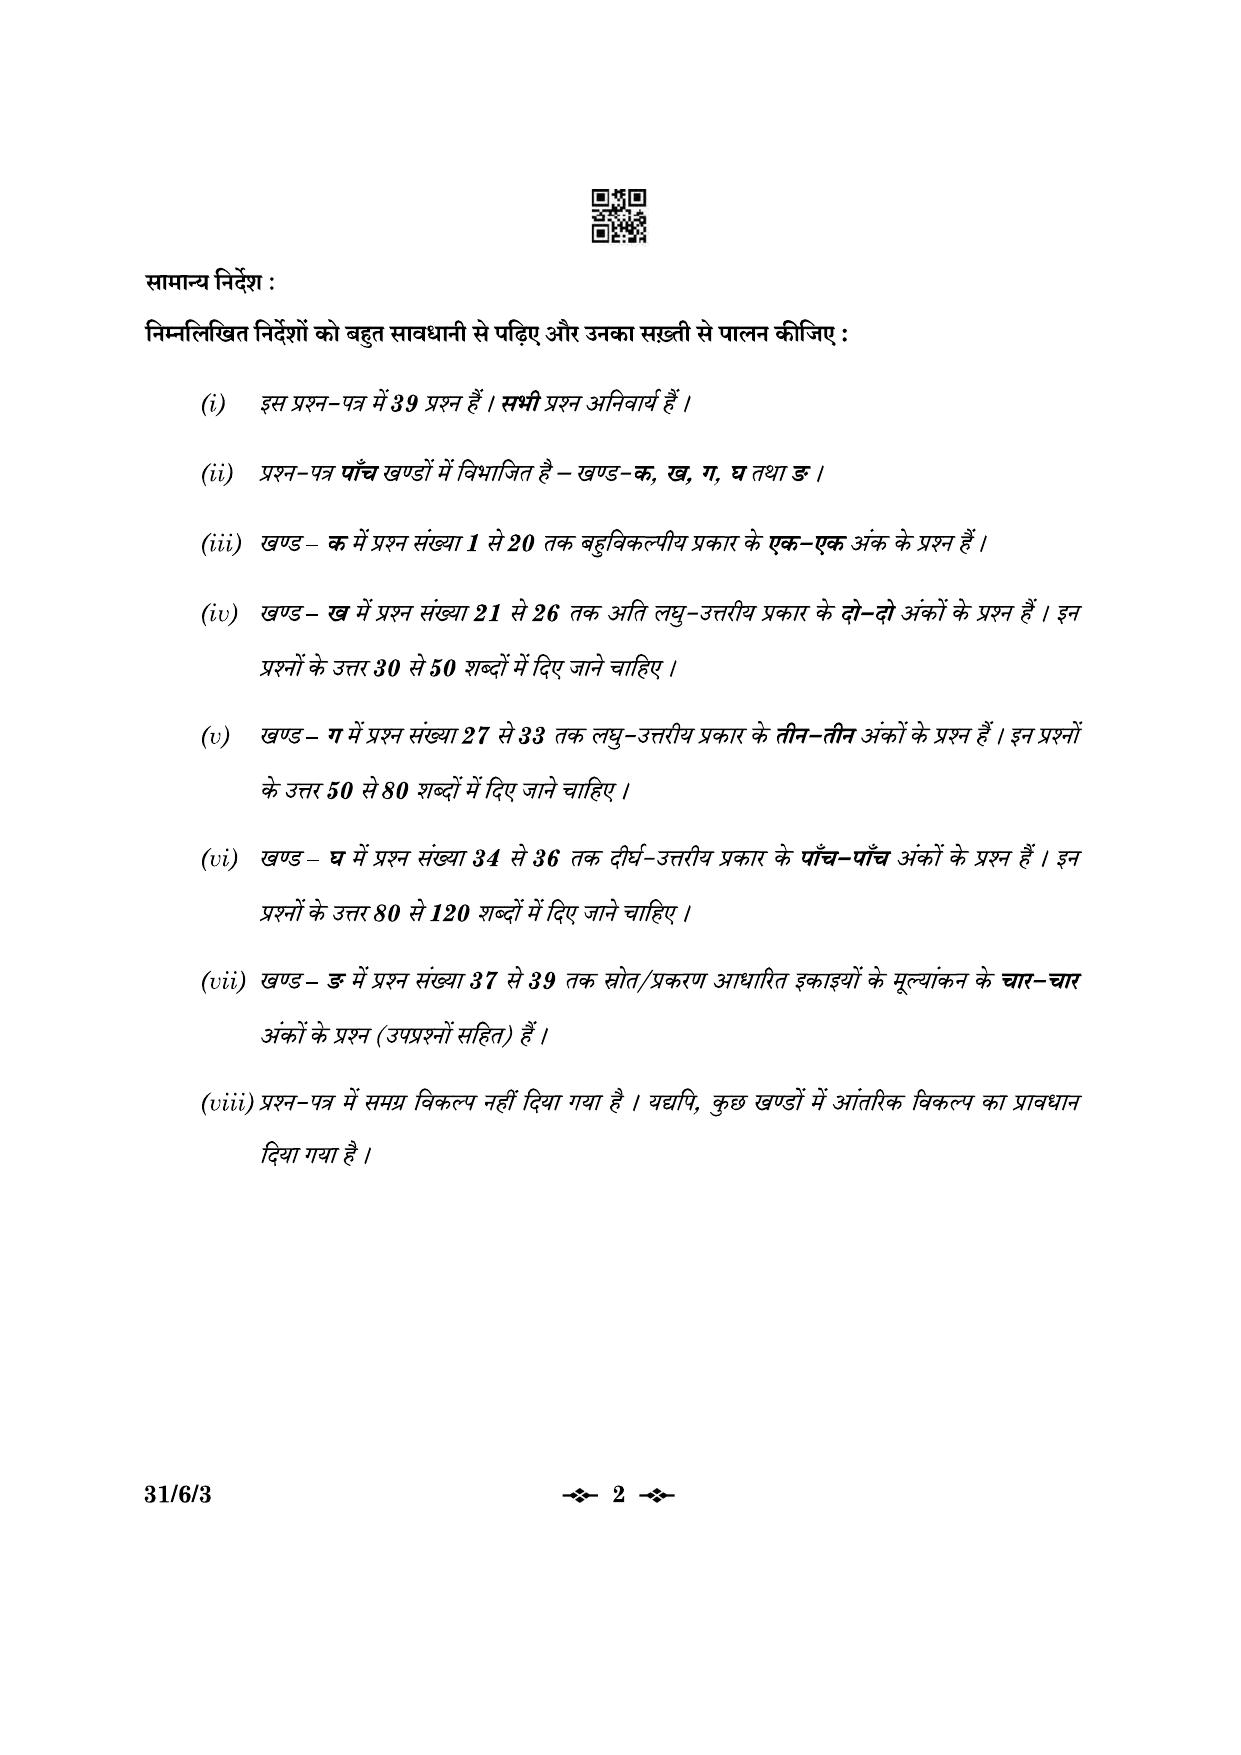 CBSE Class 10 31-6-3 Science 2023 Question Paper - Page 2